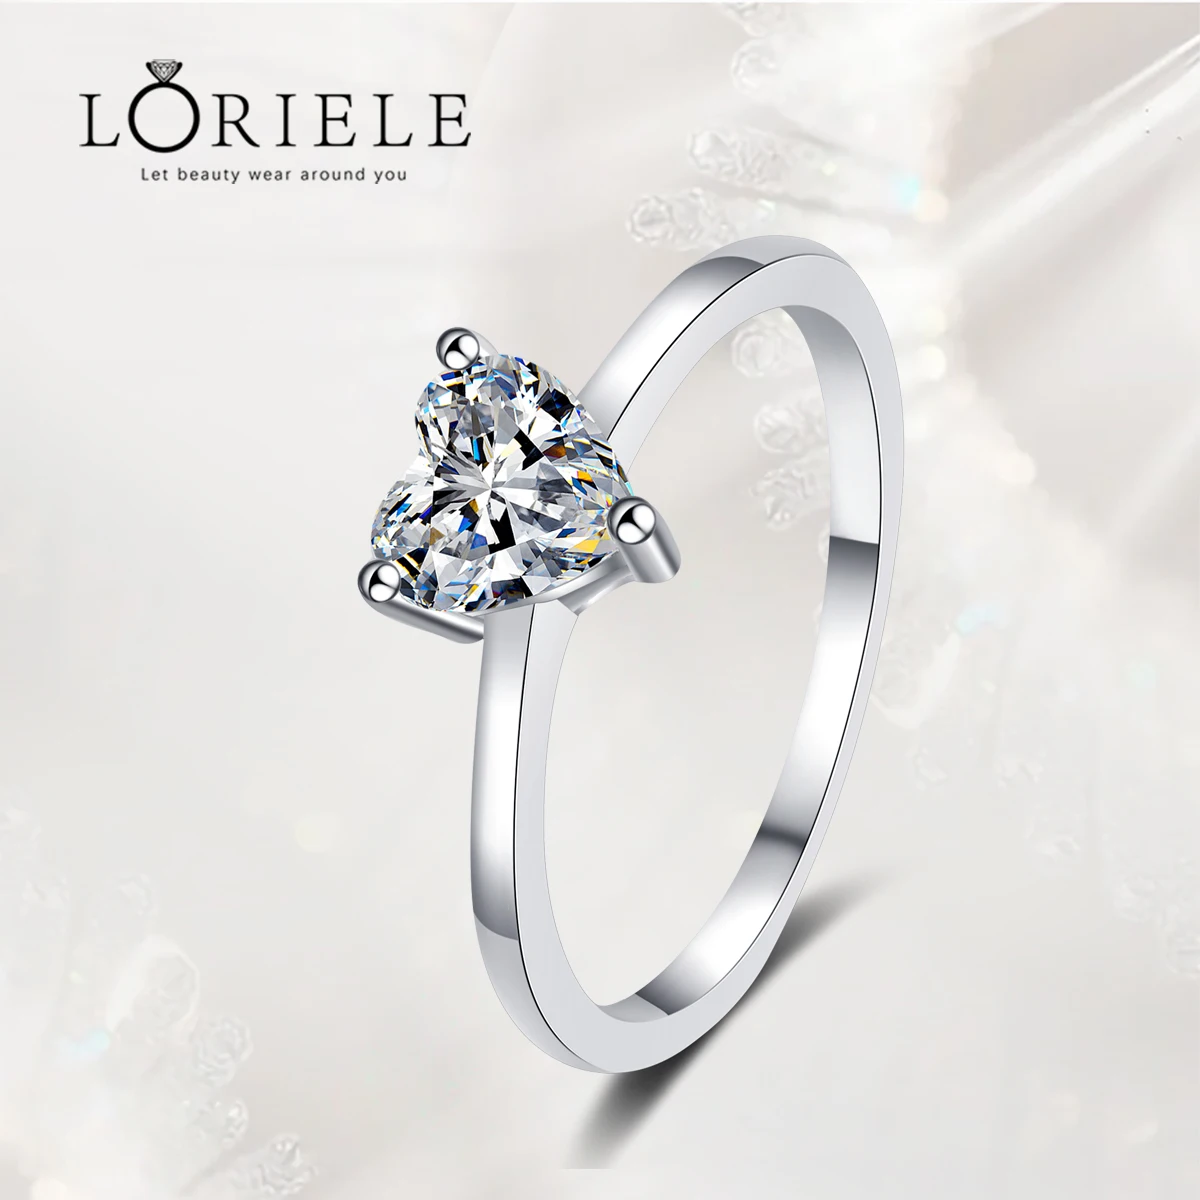 

LORIELE 0.5Ct Heart Cut Moissanite Diamond Solitaire Engagement Wedding Ring Sterling Silver Eternity Bands Bridal Sets for Wome